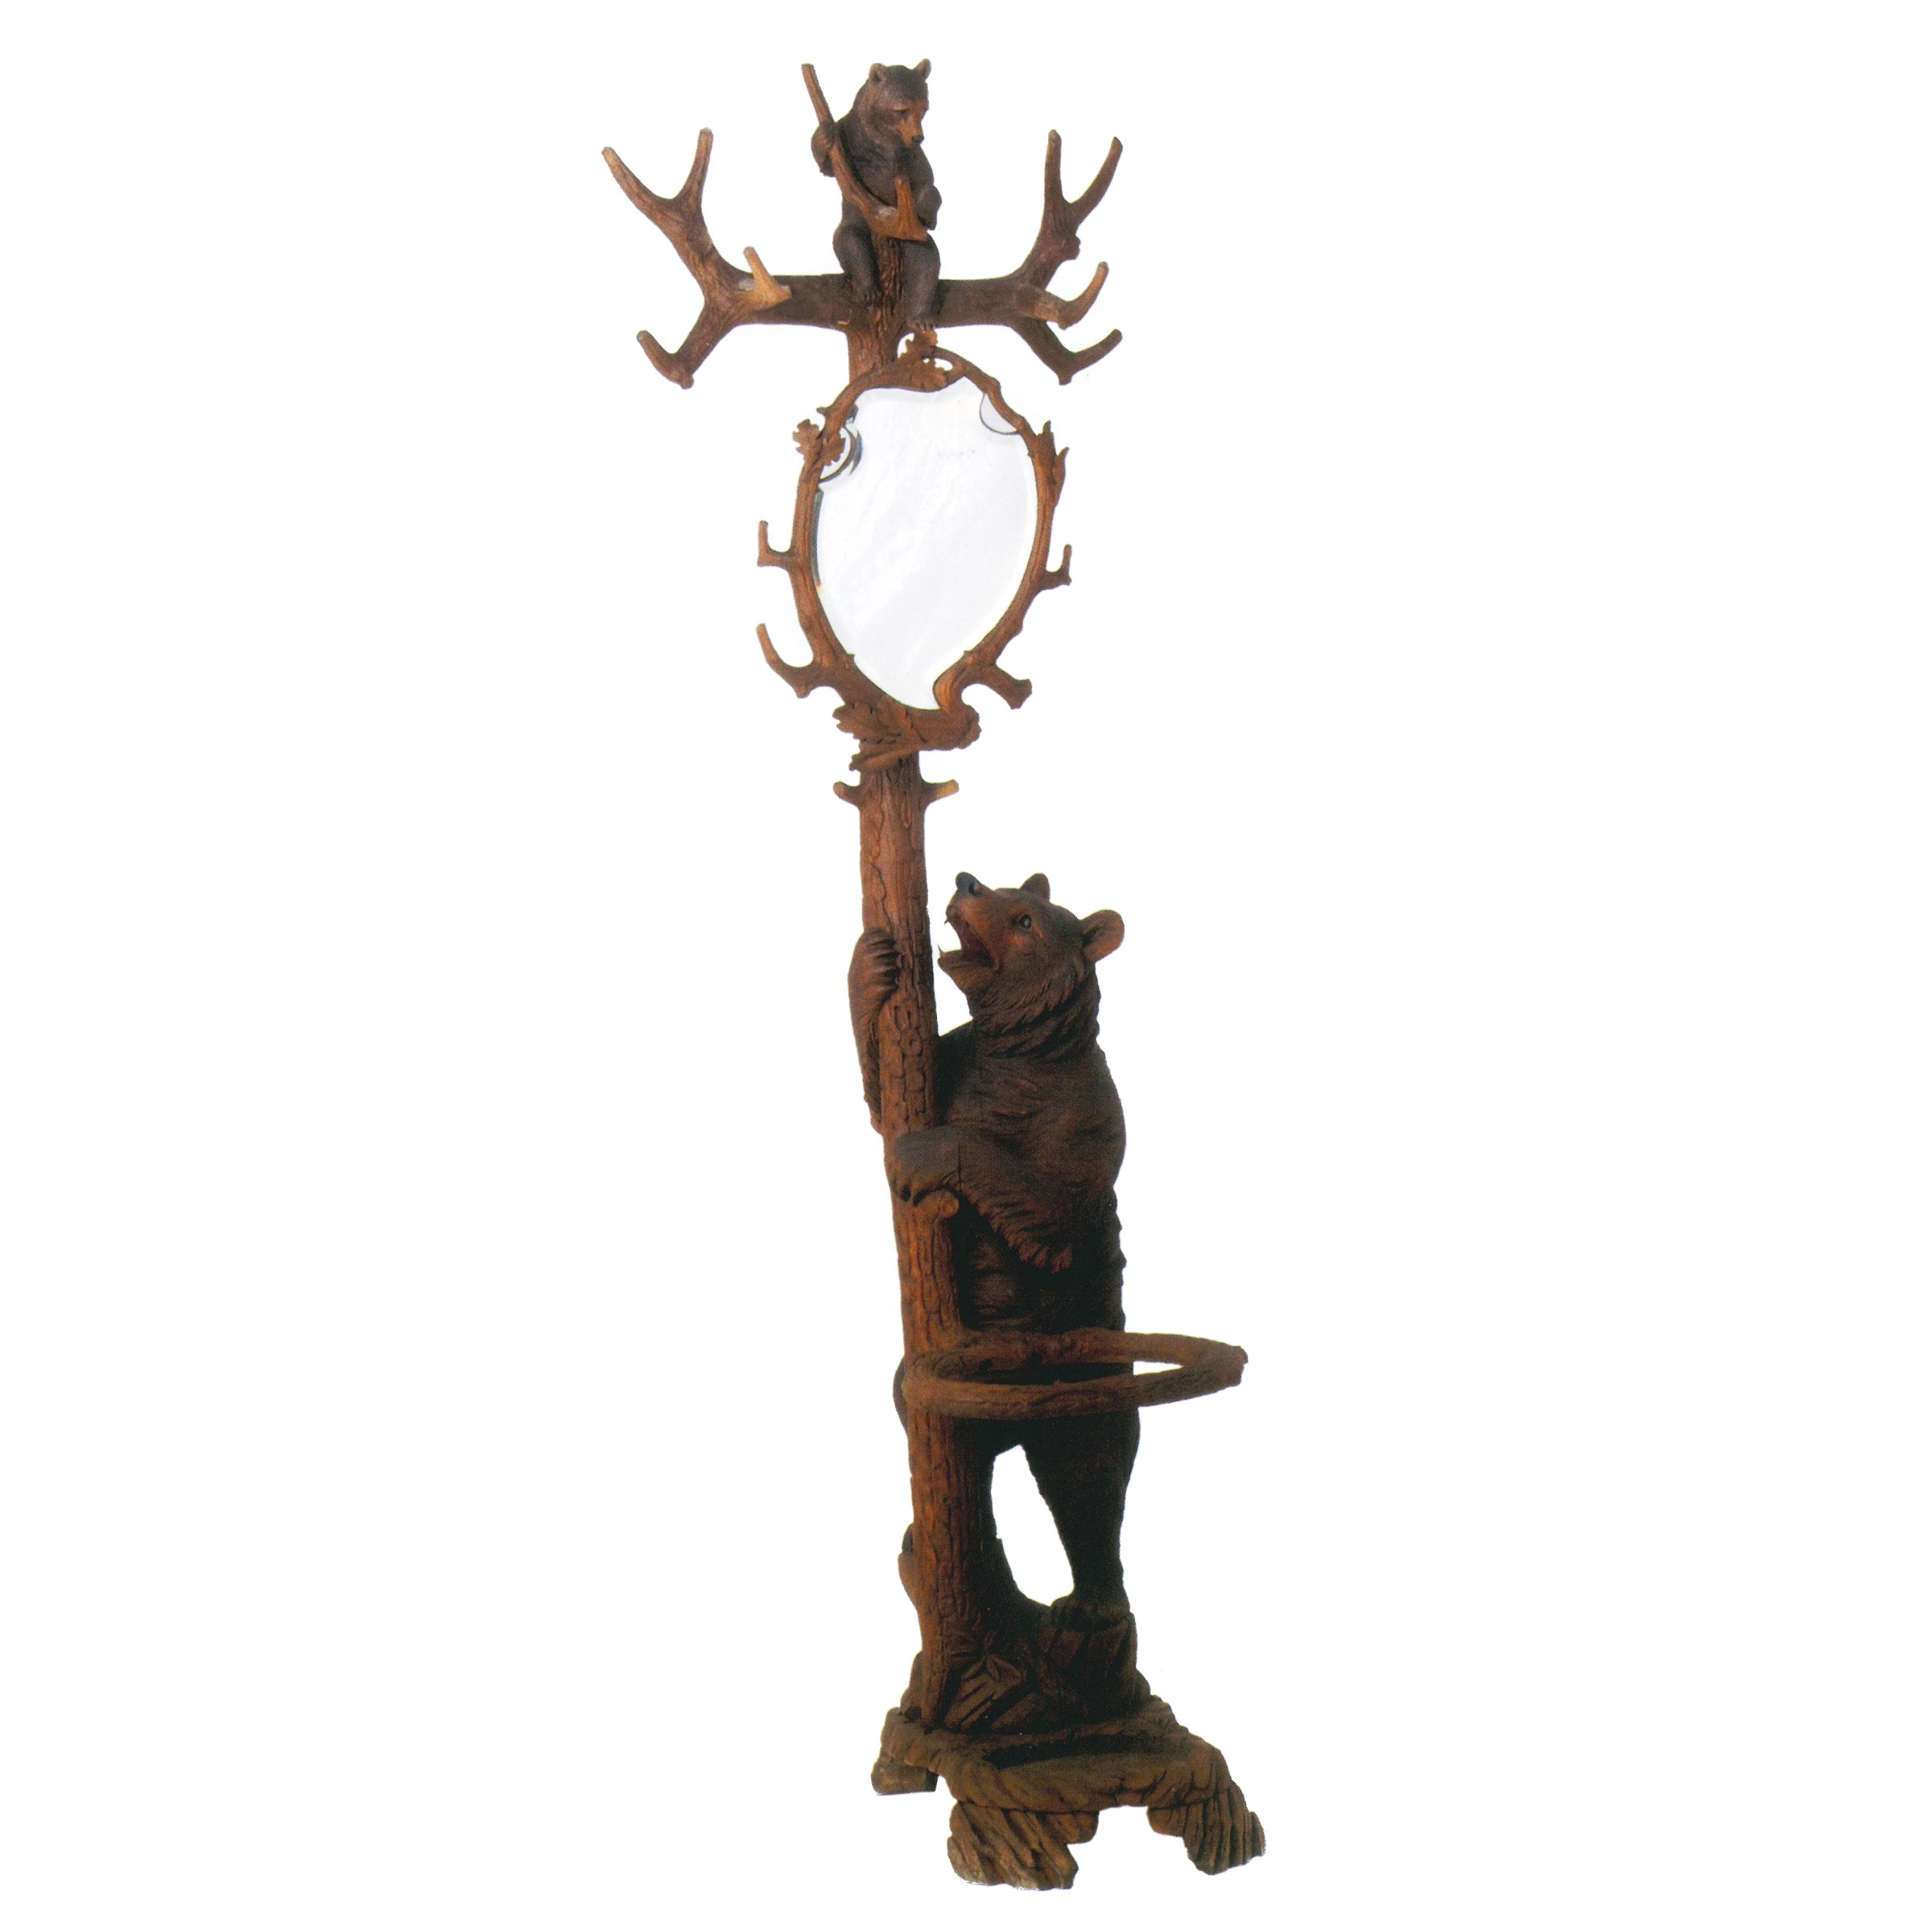 Bear and Cub Hall Stand, Furnishings, Black Forest, Hall Tree